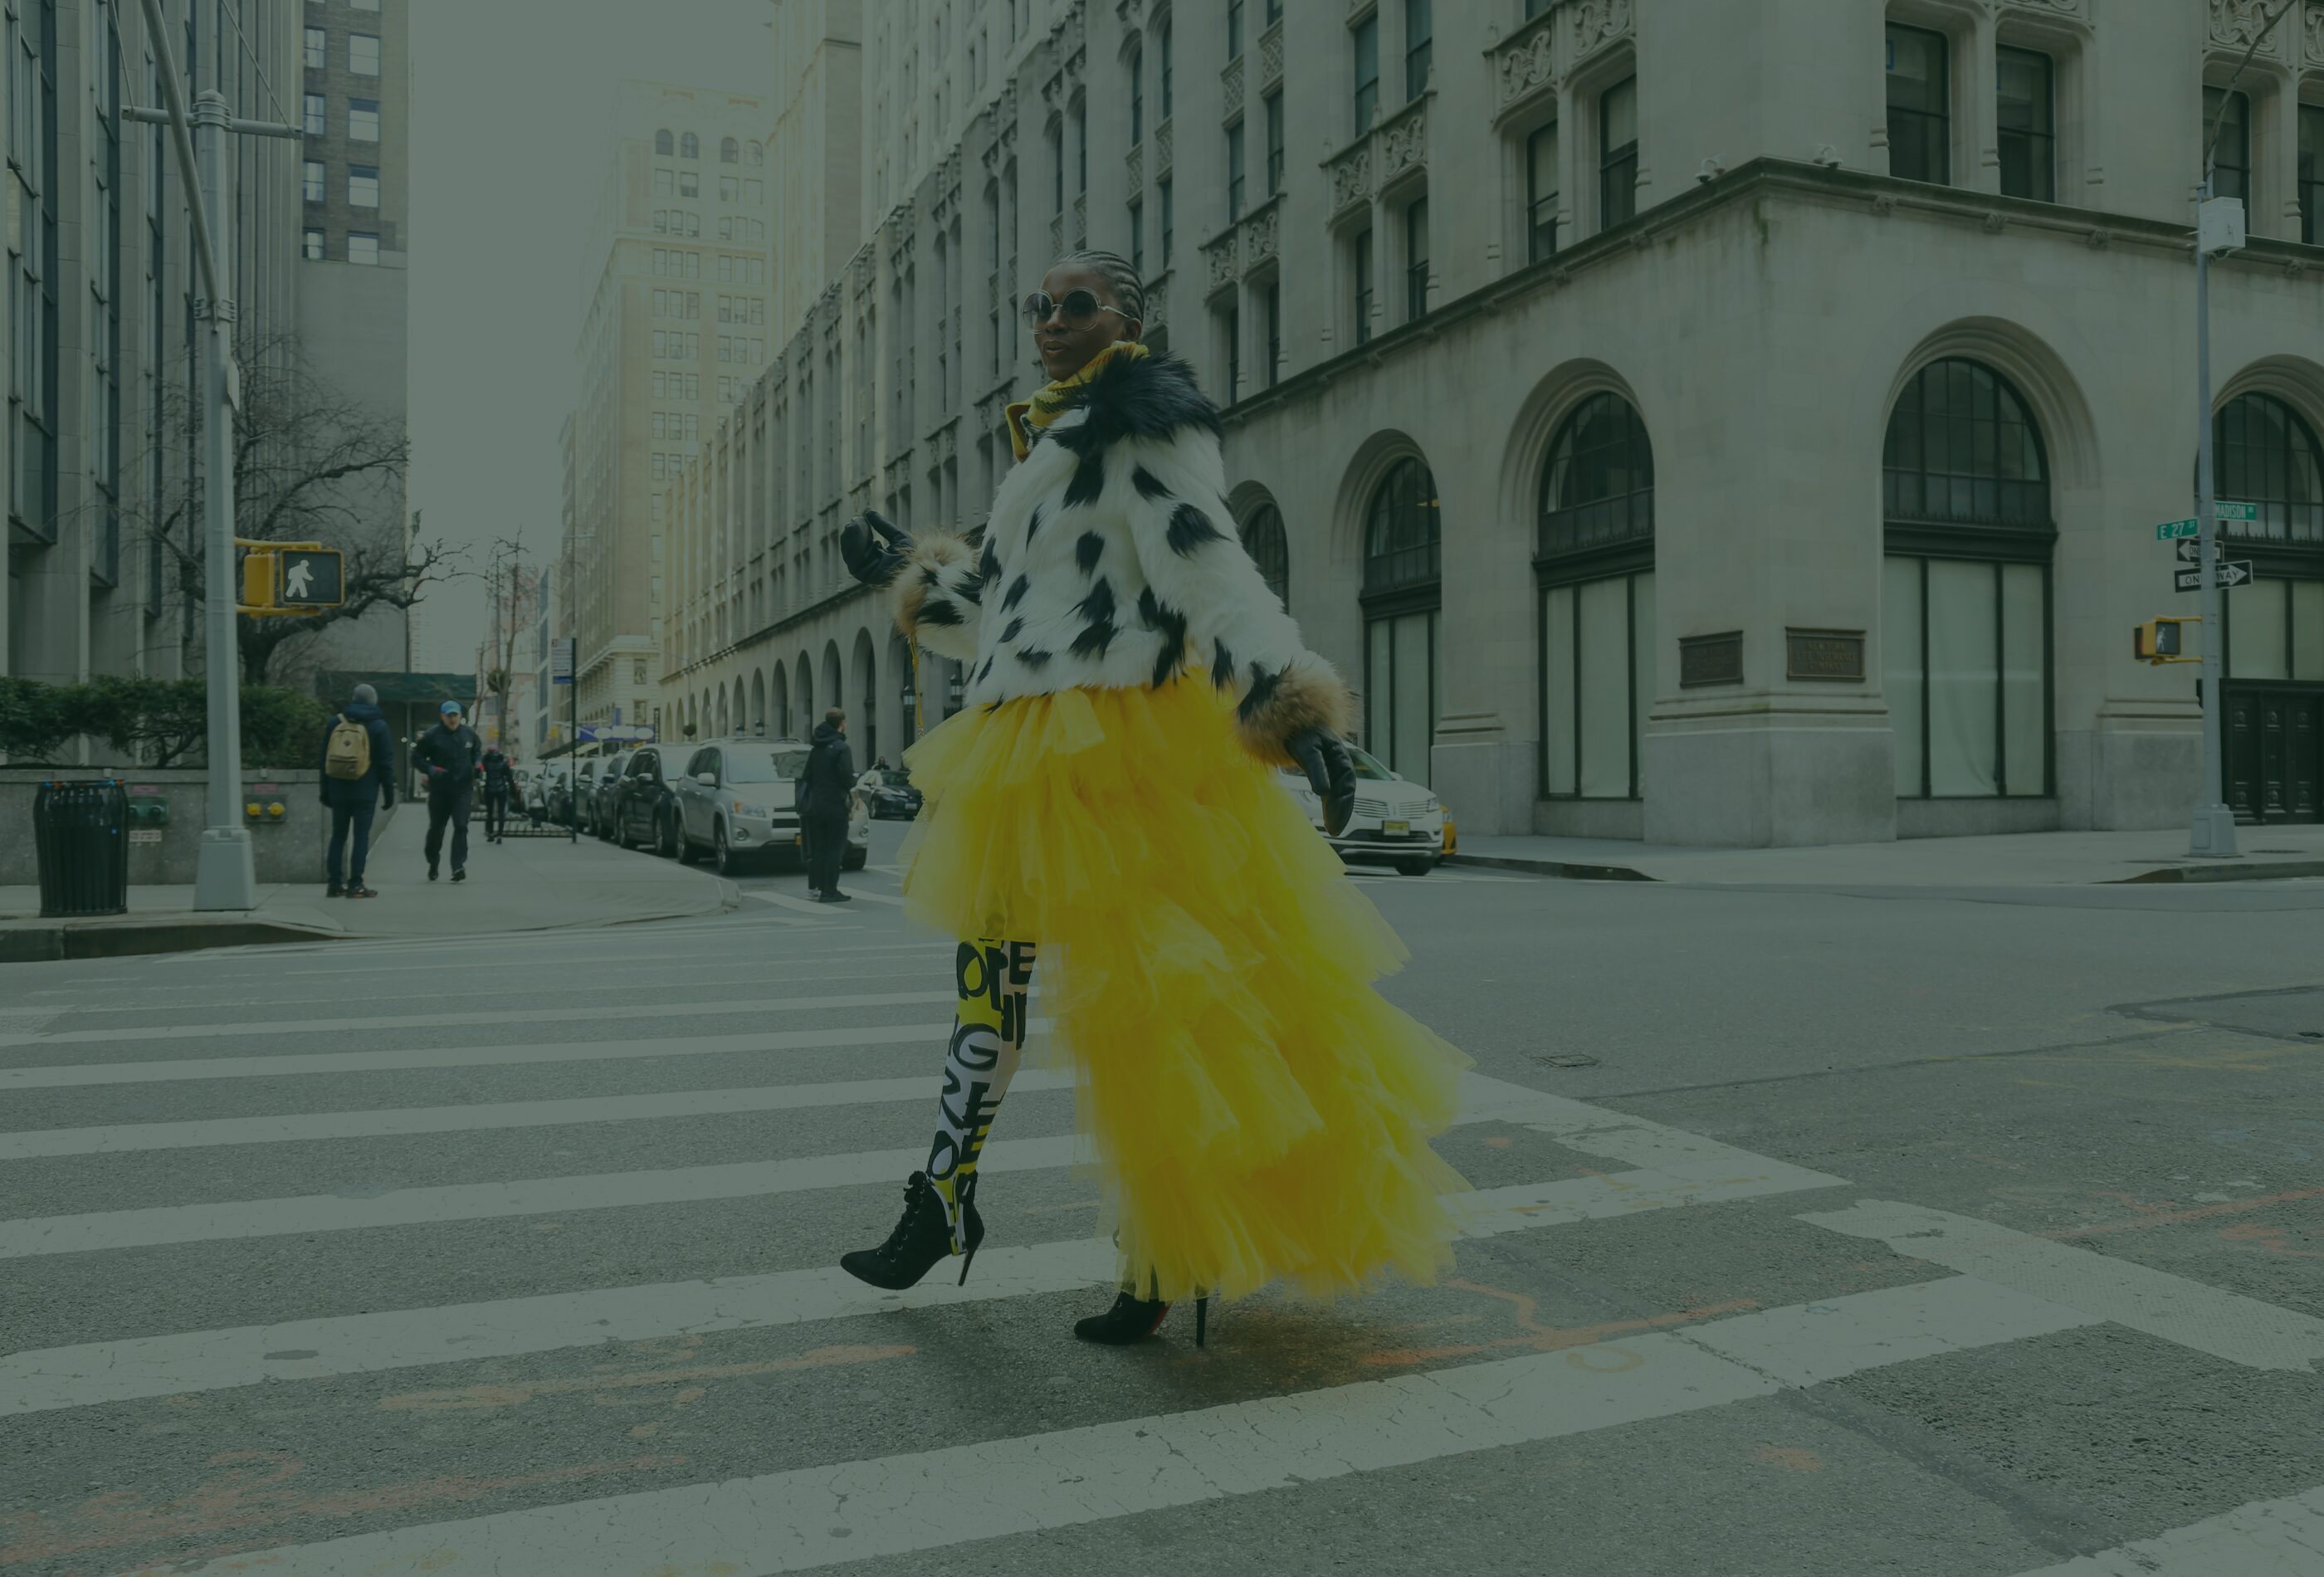 a woman is crossing the street in a yellow dress.